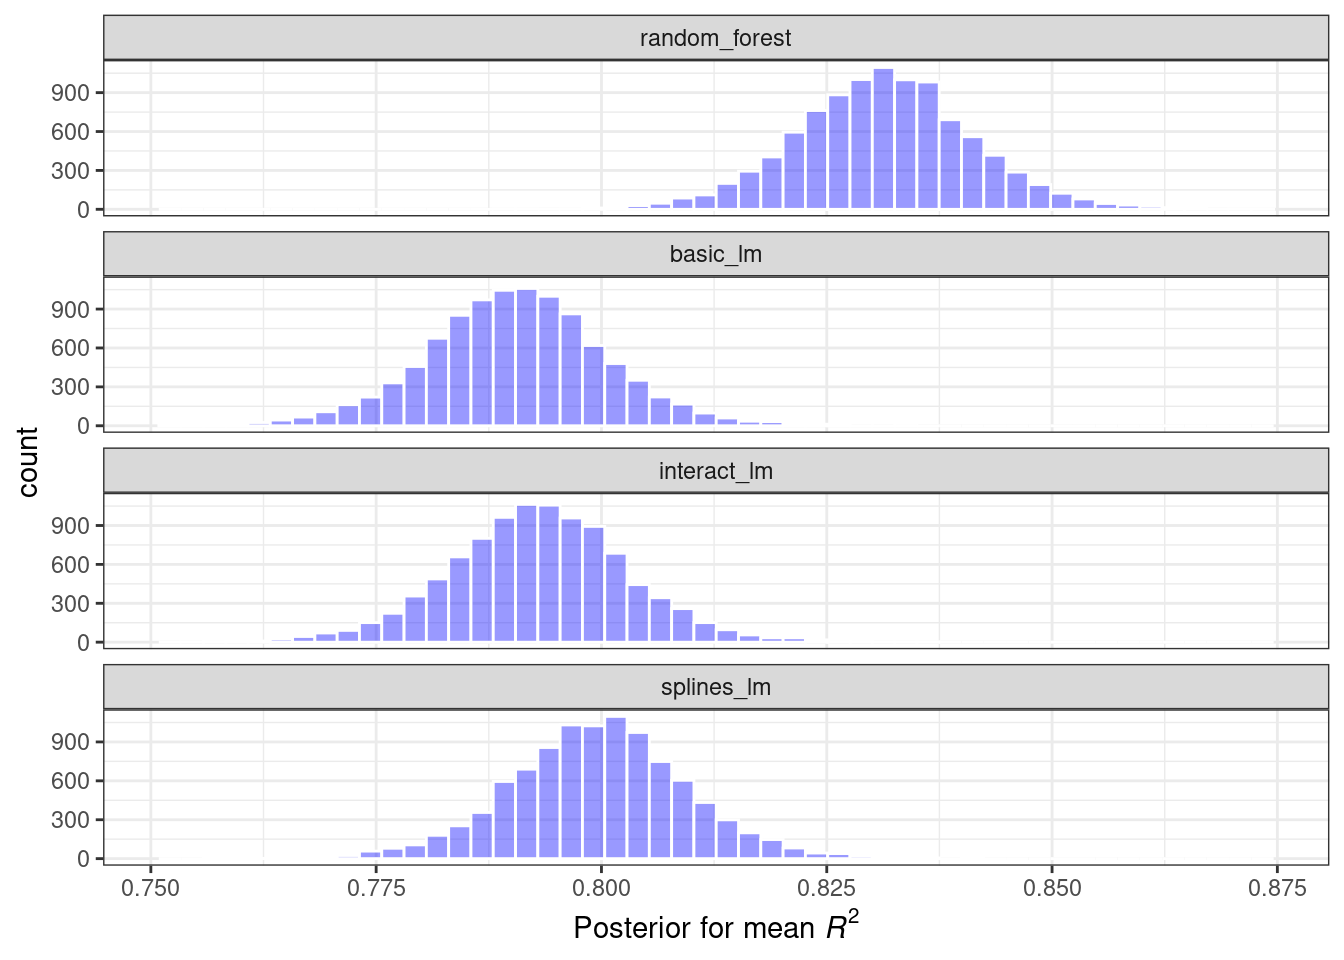 Posterior distributions for the coefficient of determination using four different models. The distribution corresponding to random forest is largest and has little overlap with the other model's posteriors.